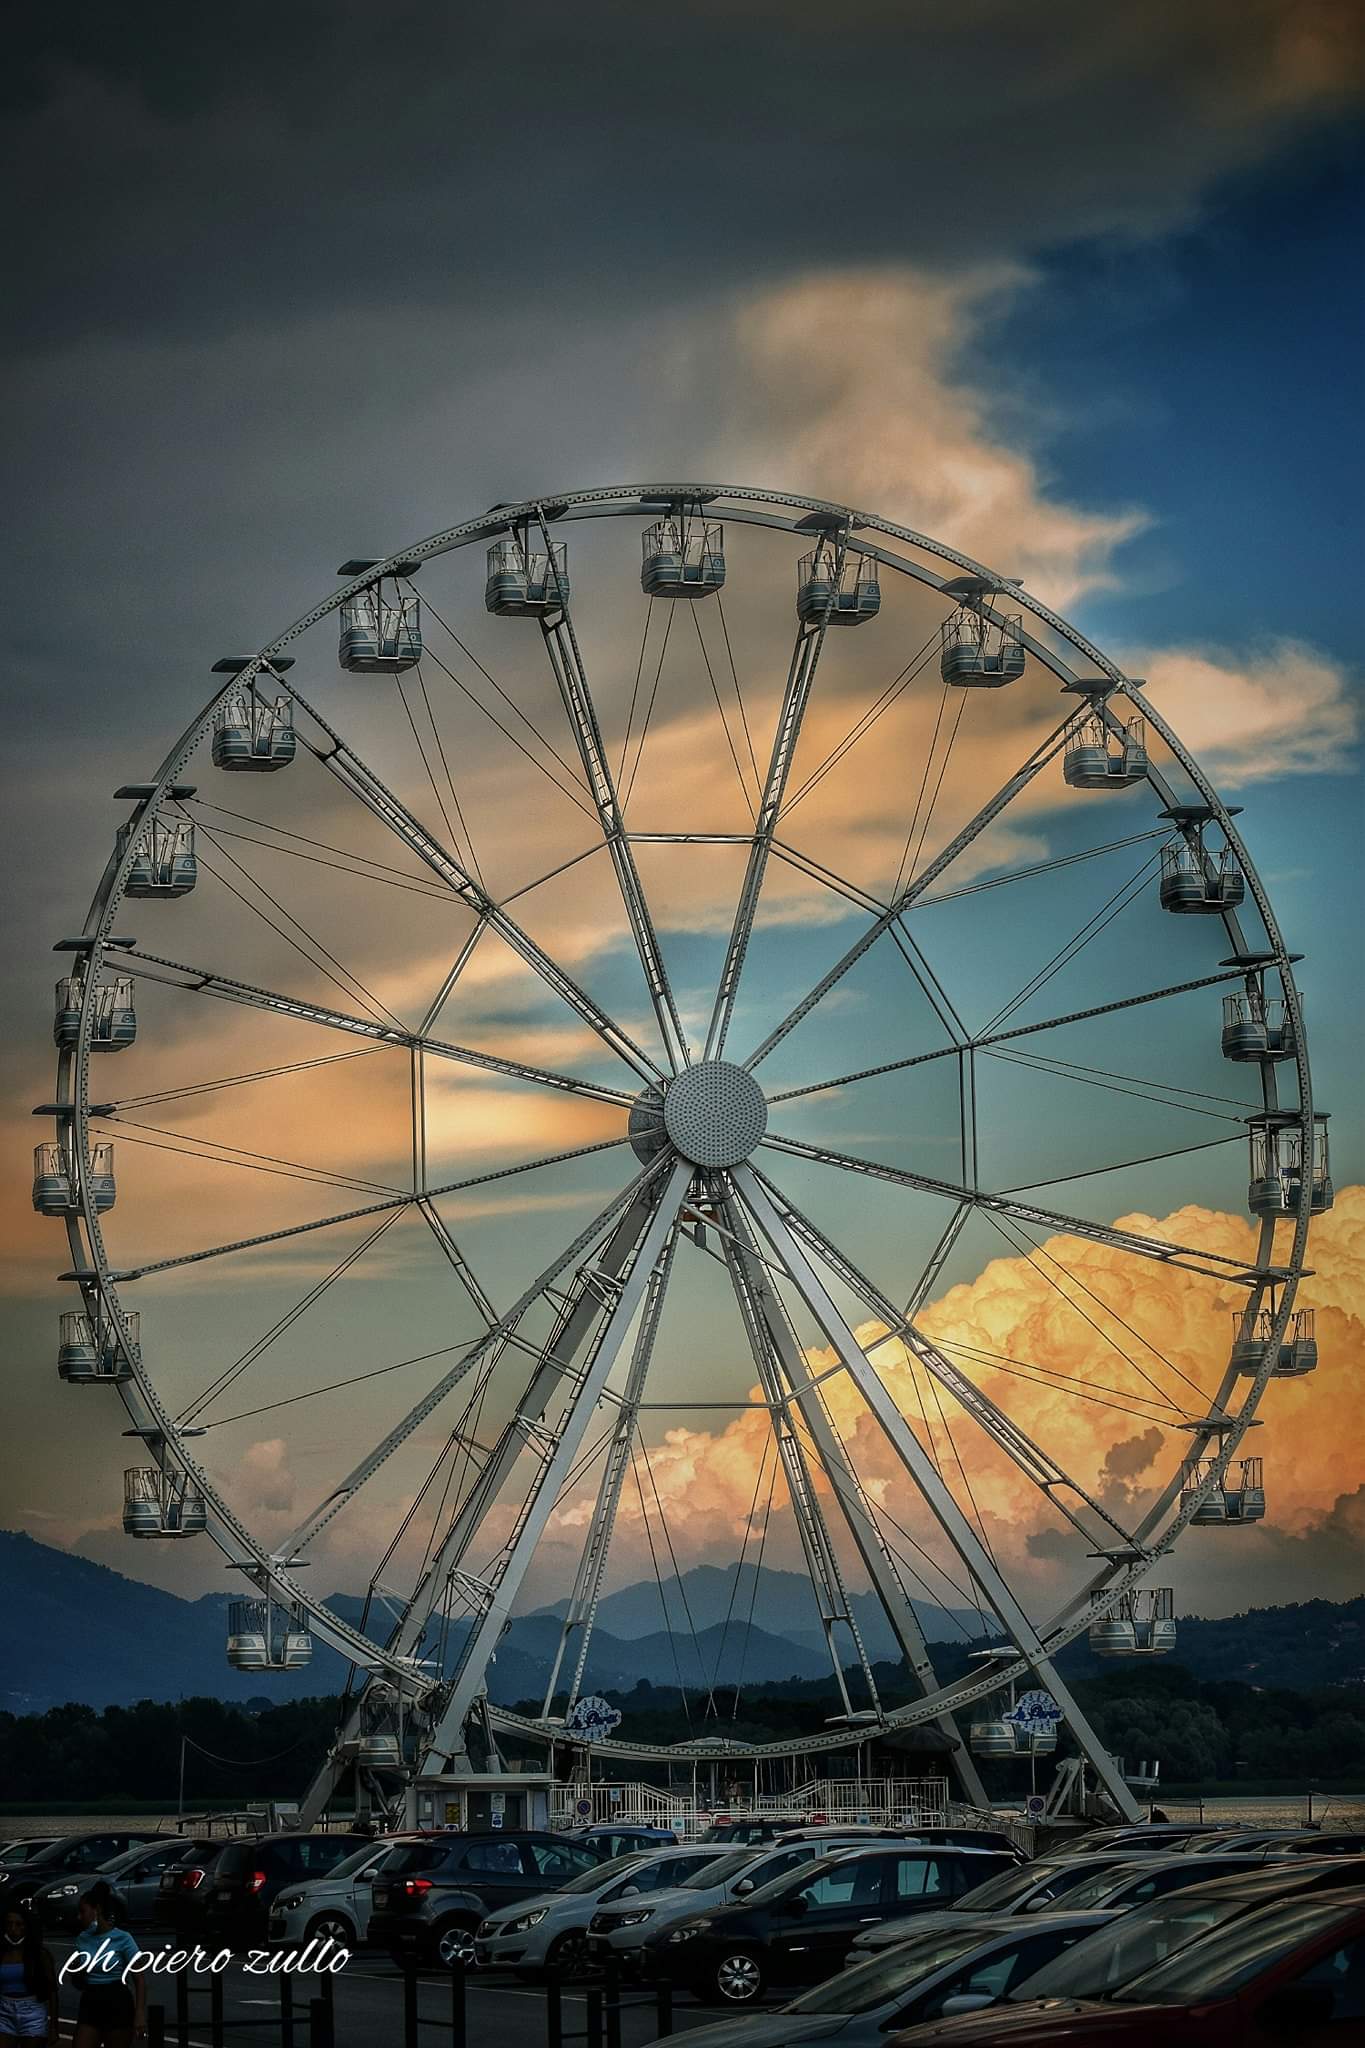 Spin the wheel...